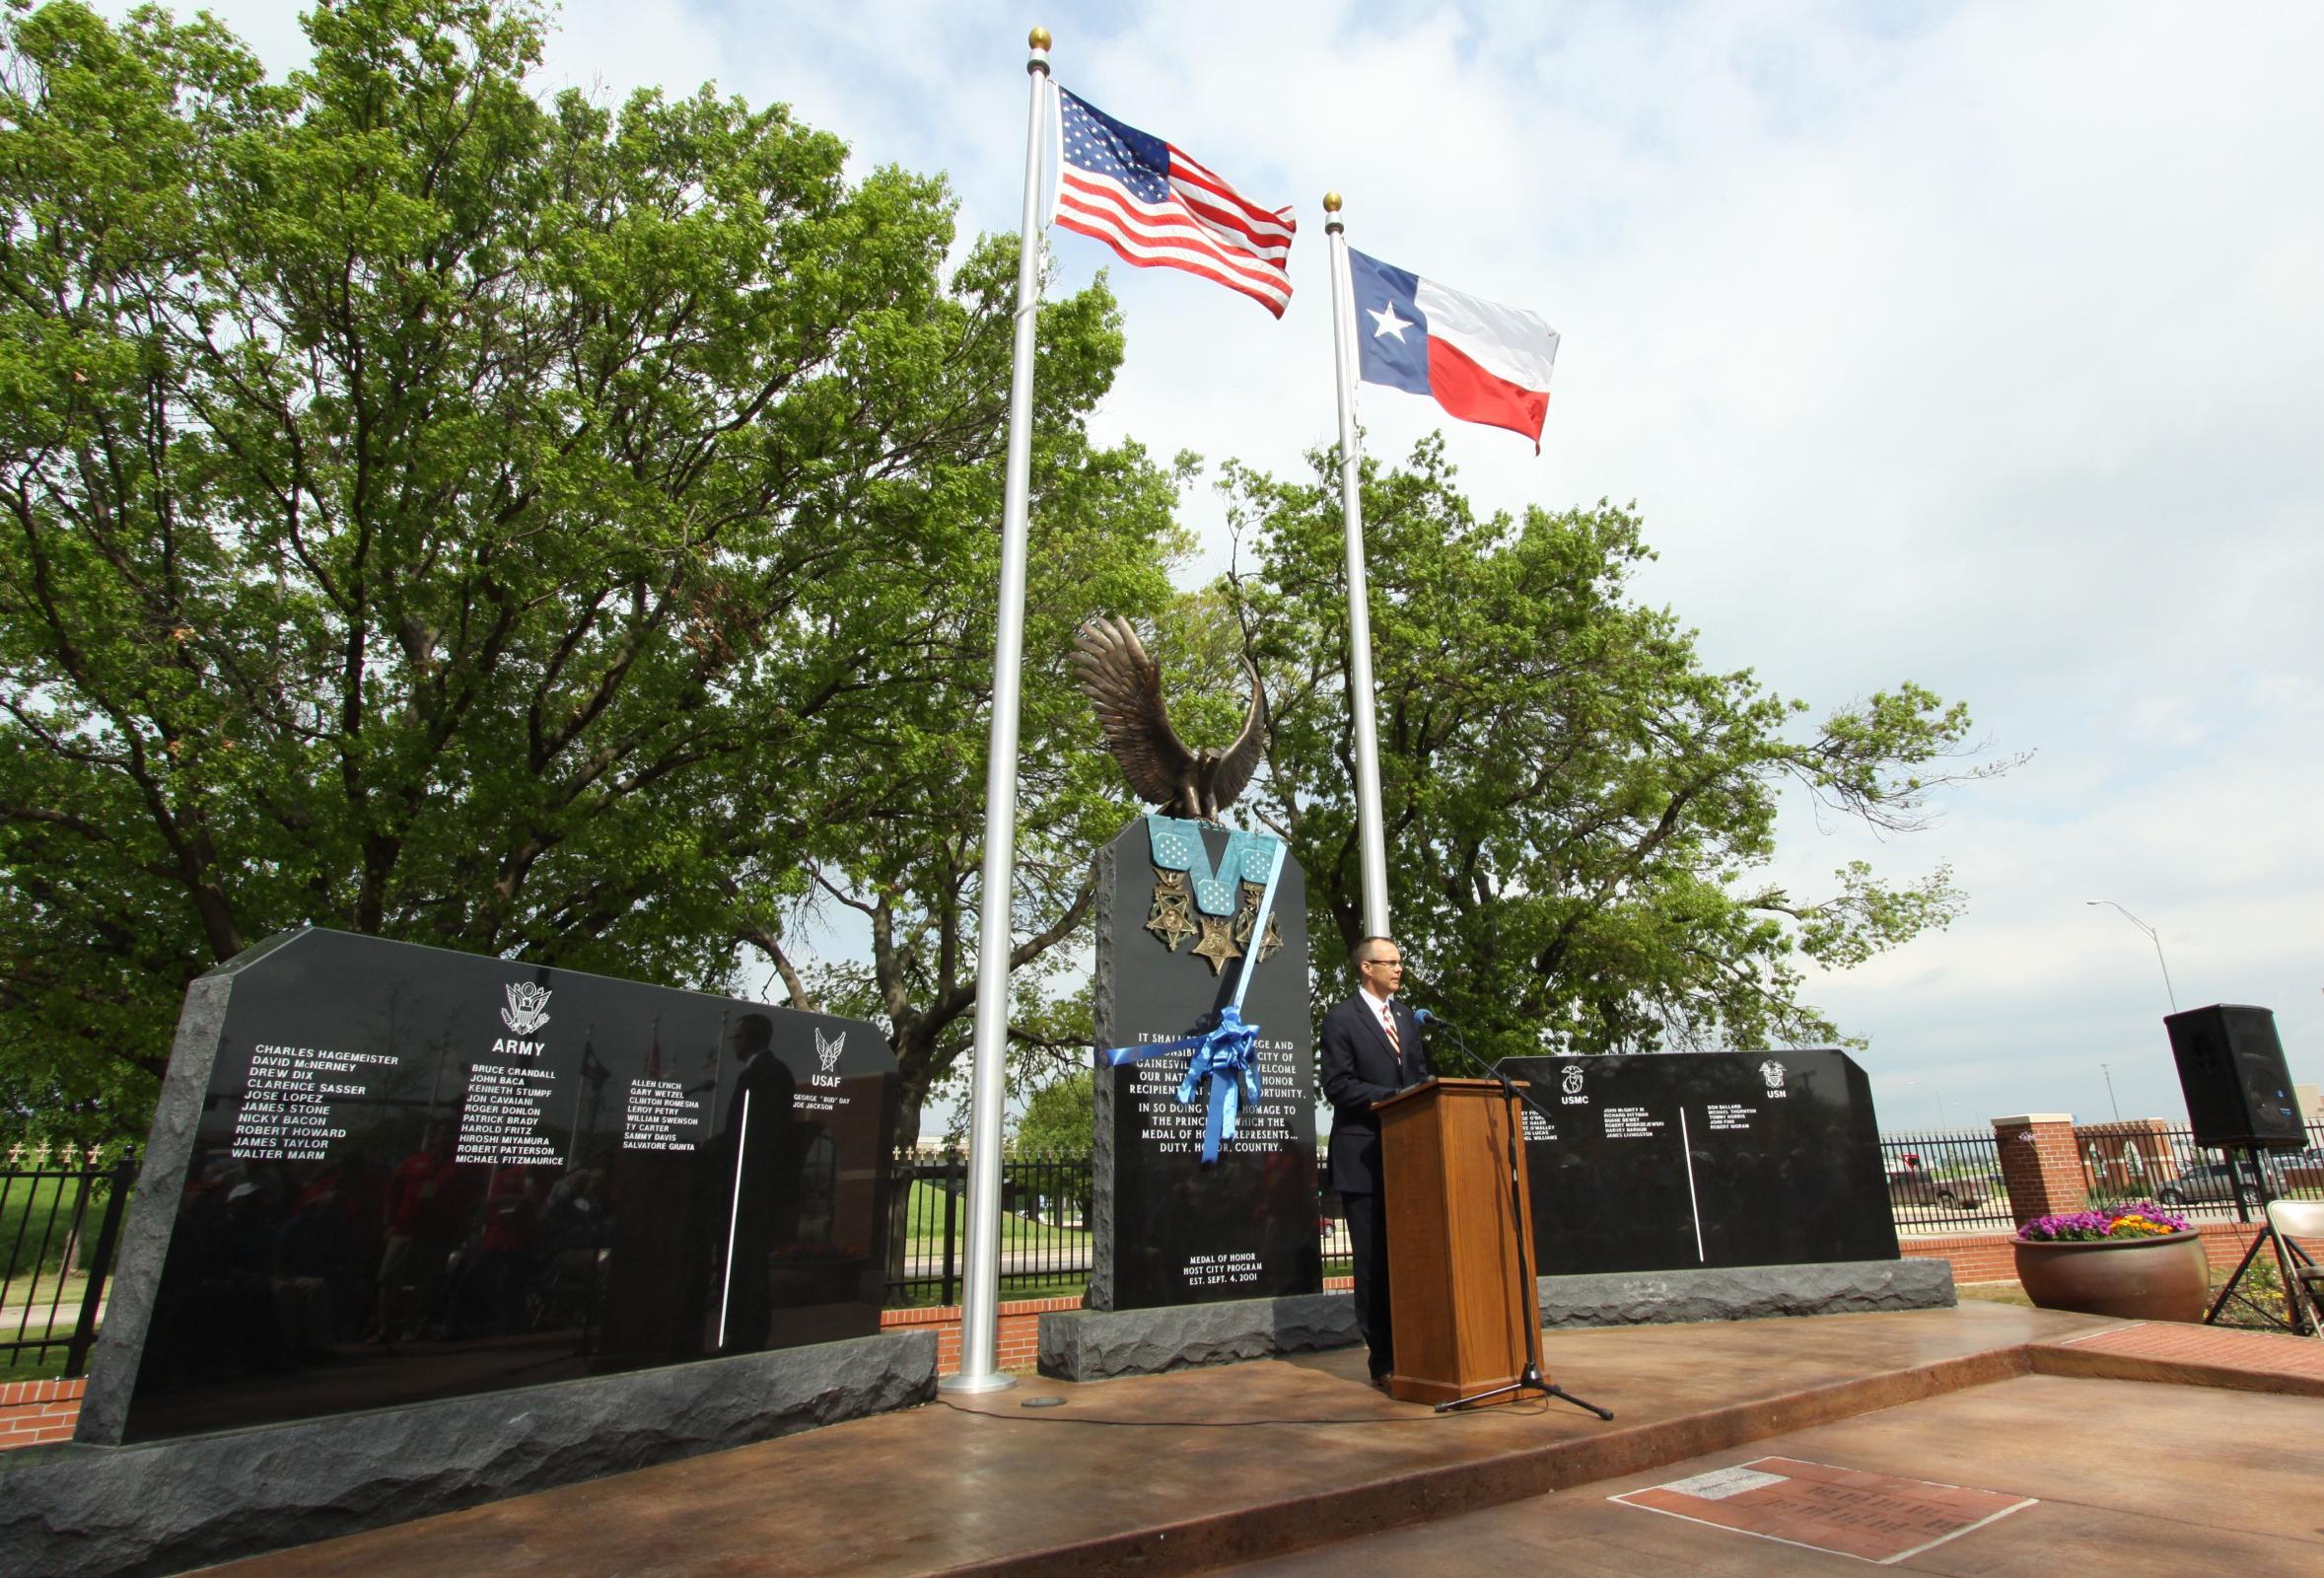 Medal of Honor presentation in Gainesville Texas